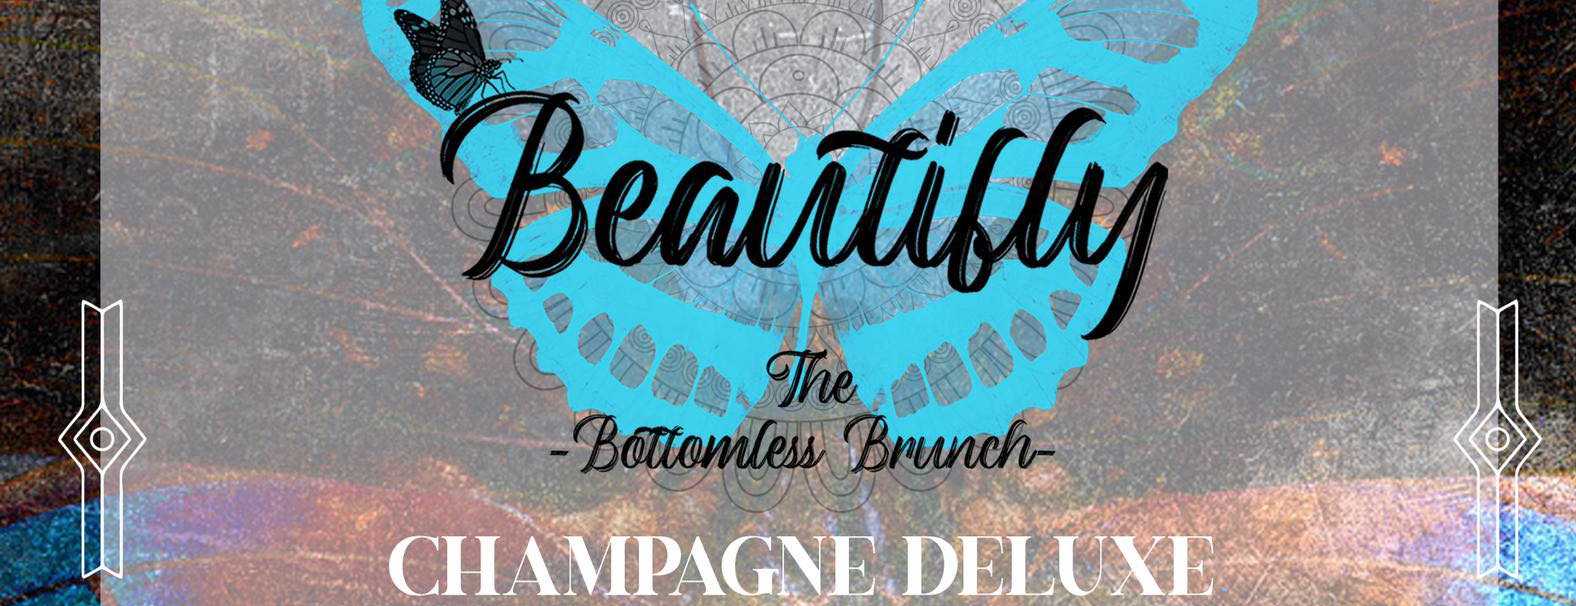 Beautifly the Bottomless Brunch - CHAMPAGNE DELUXE